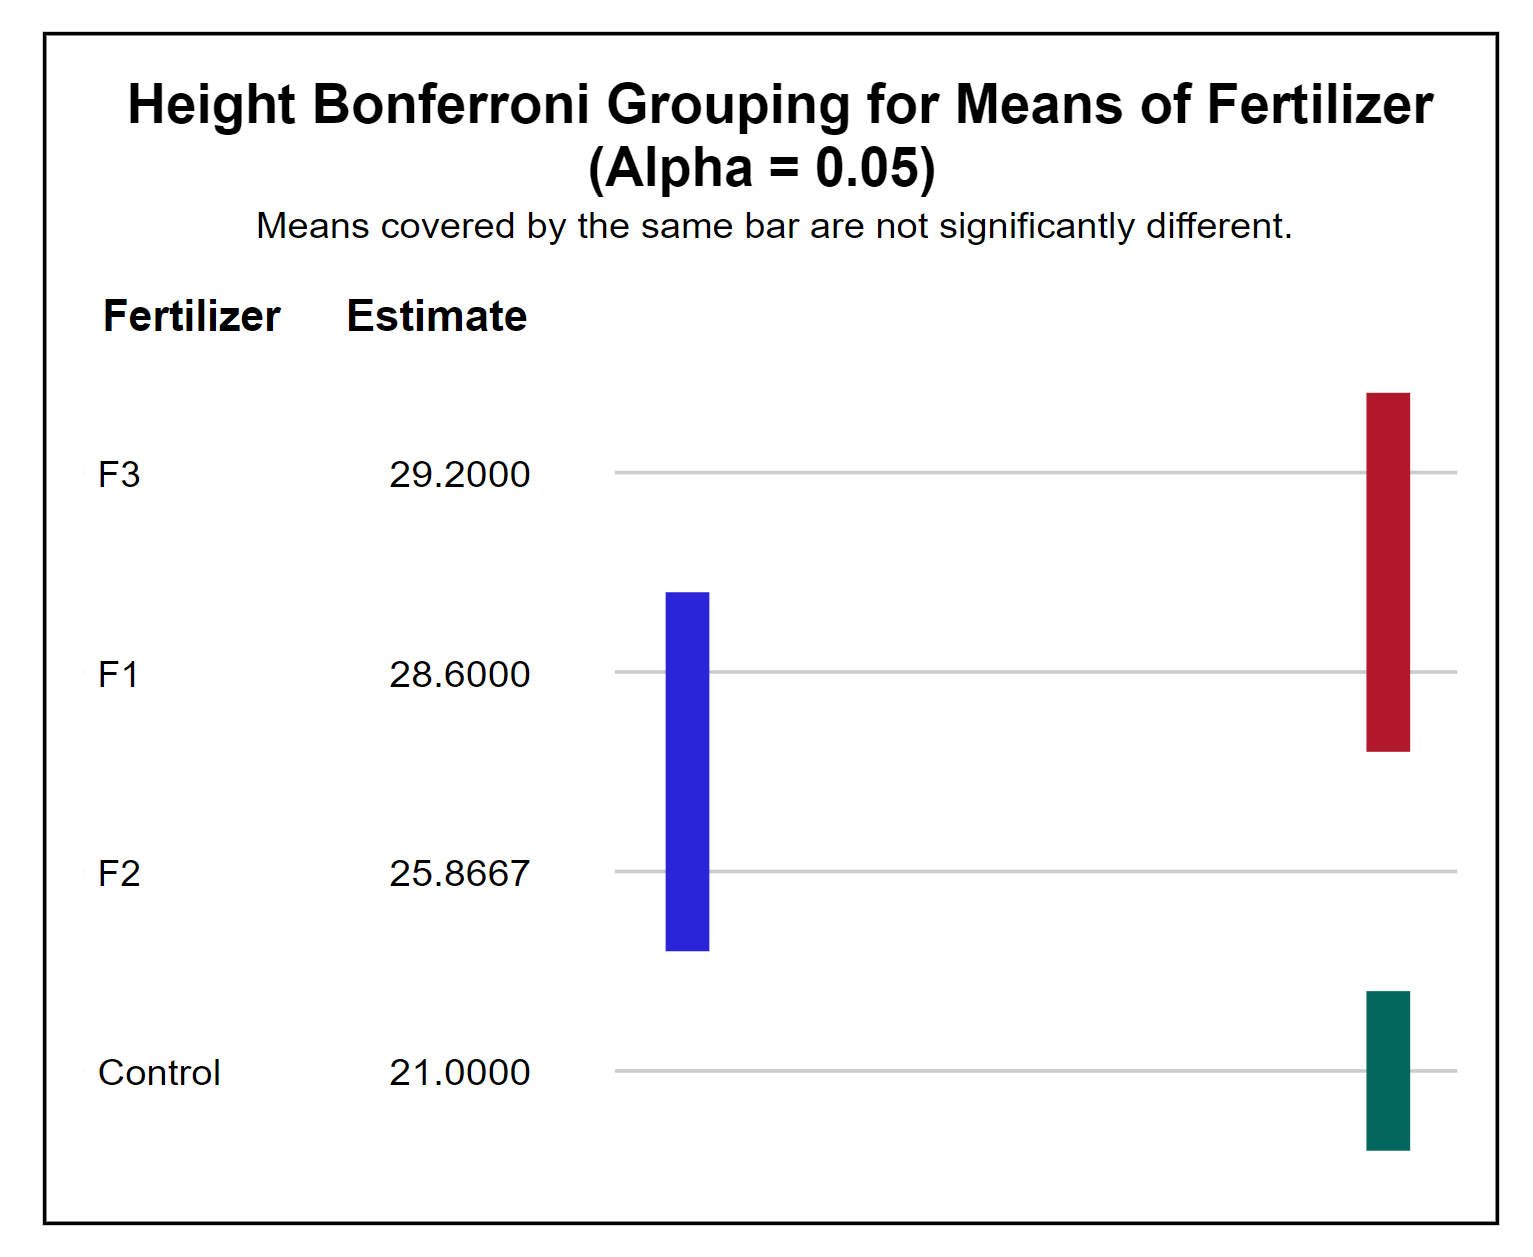 Bonferroni height grouping for fertilizer treatment means. F3 and F1 are covered witha  single red bar, F1 and F2 are covered with a single blue bar, and Control is covered with a green bar.